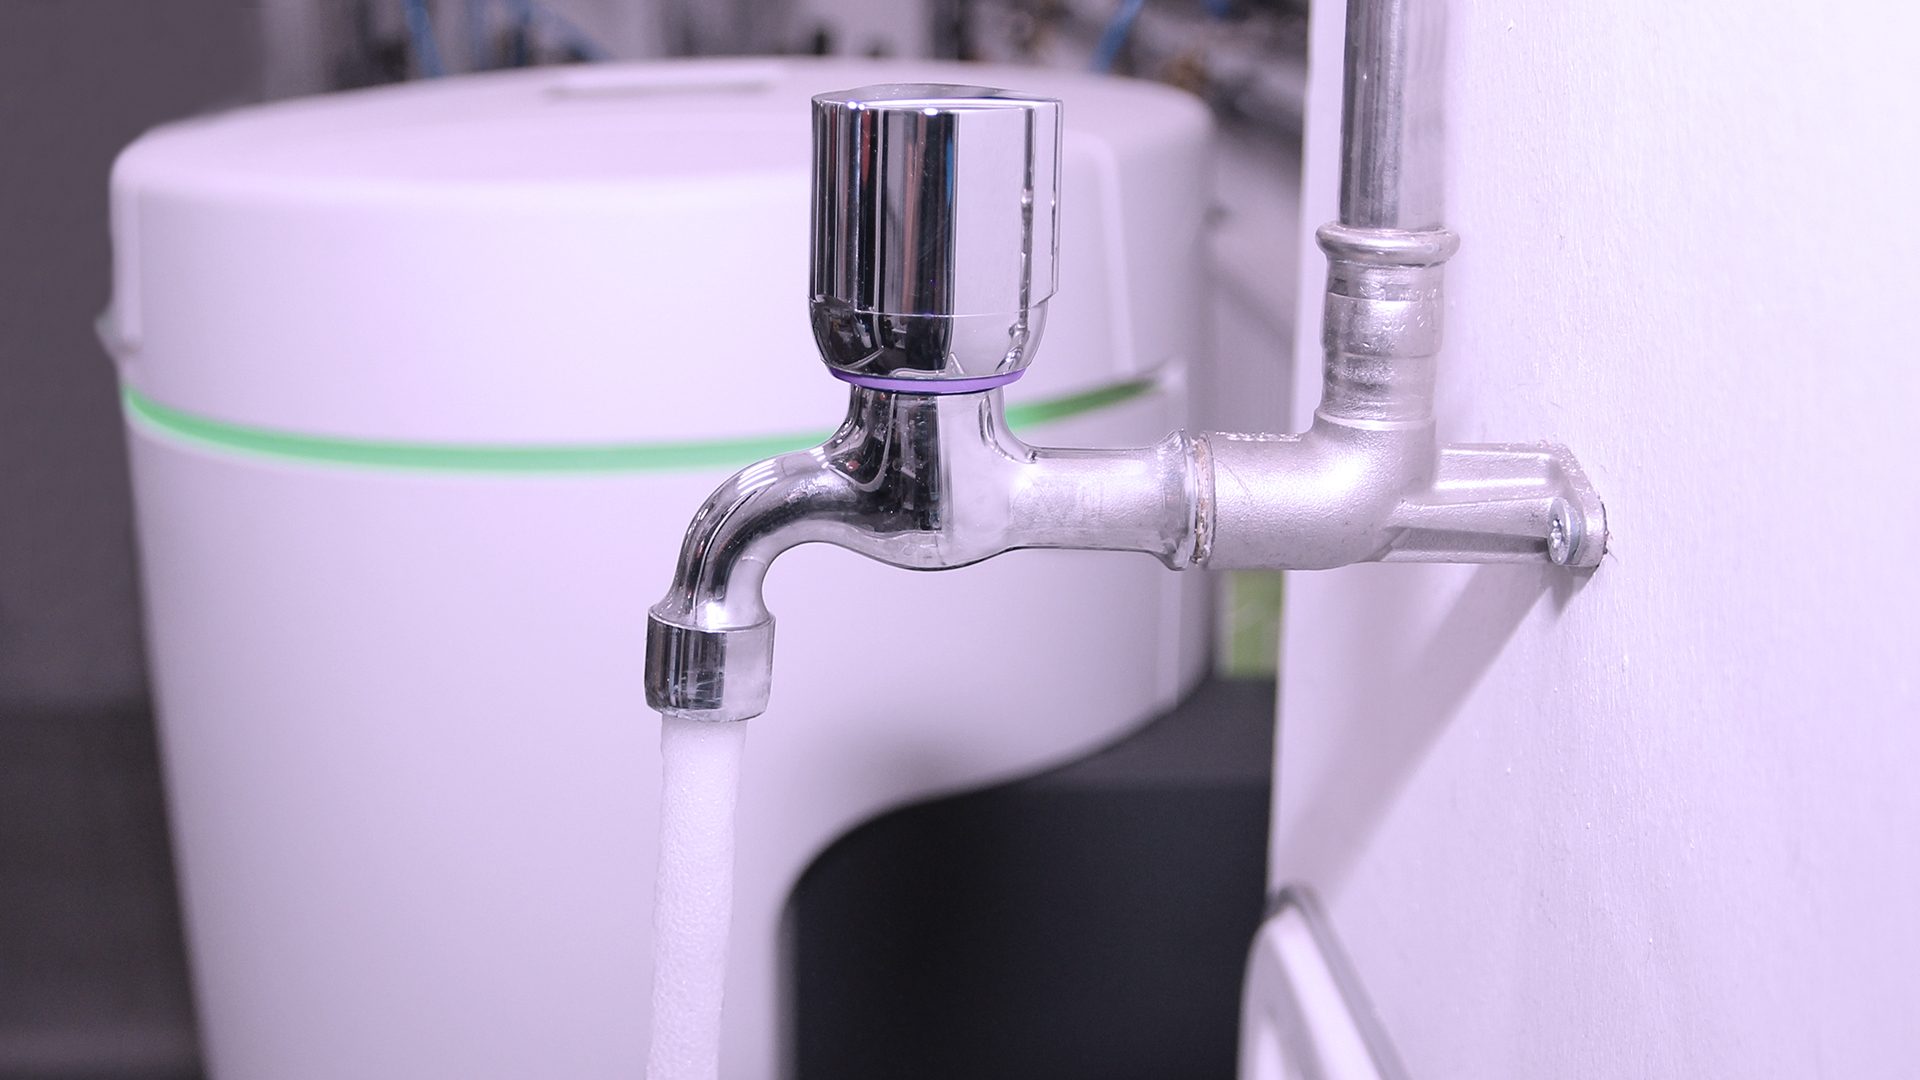 Water from water softening systems